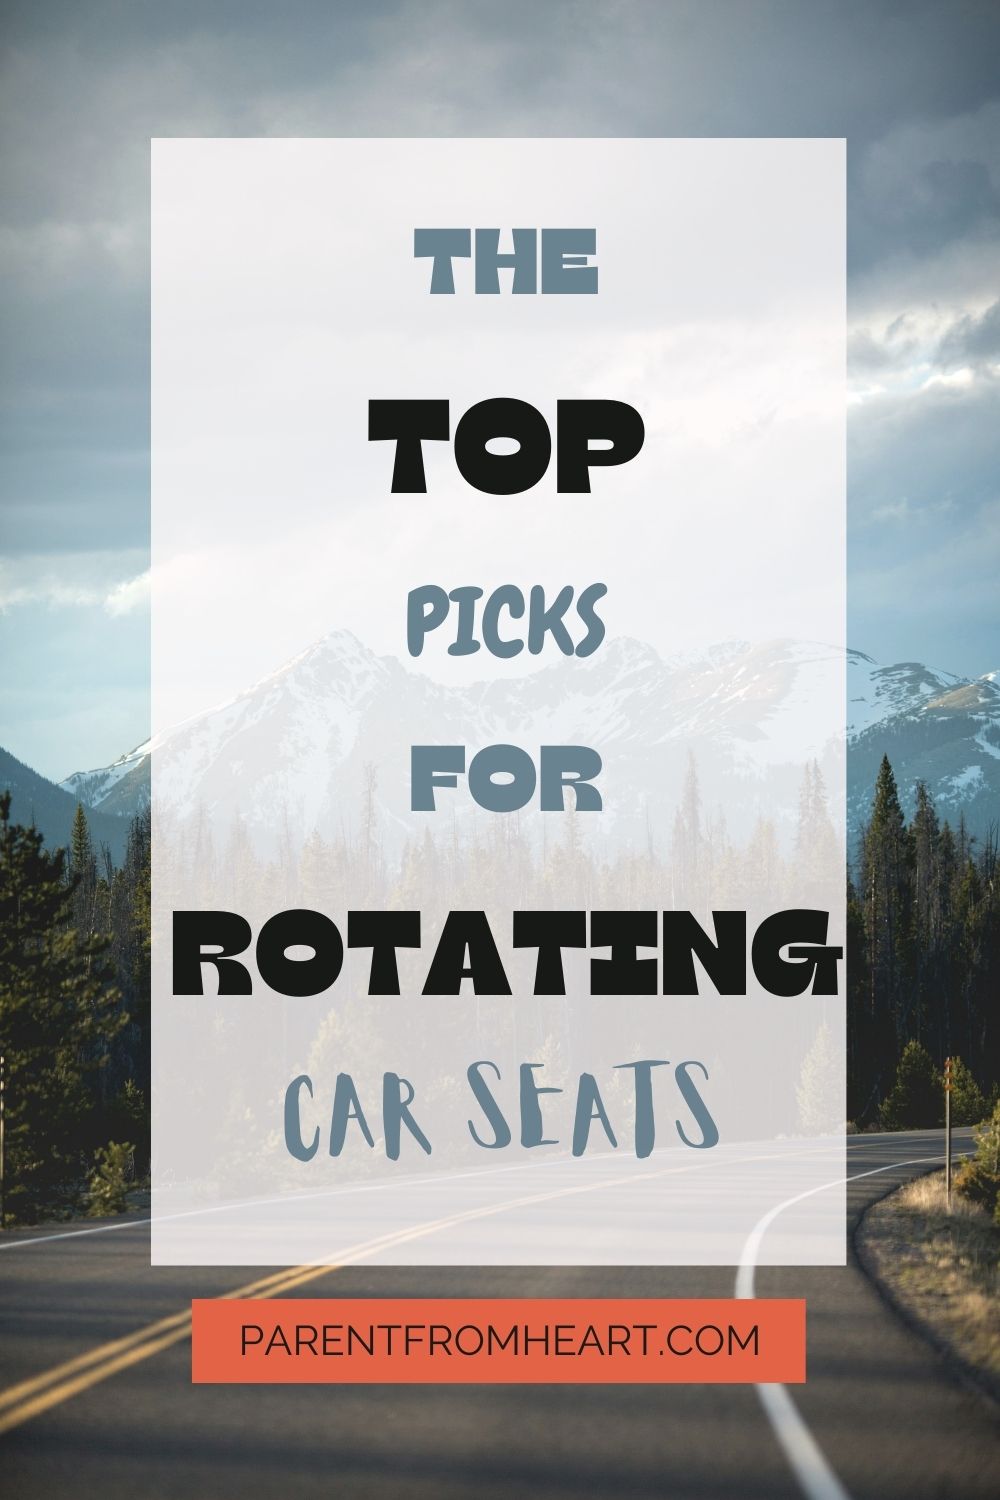 The Top Picks for Rotating Car Seats